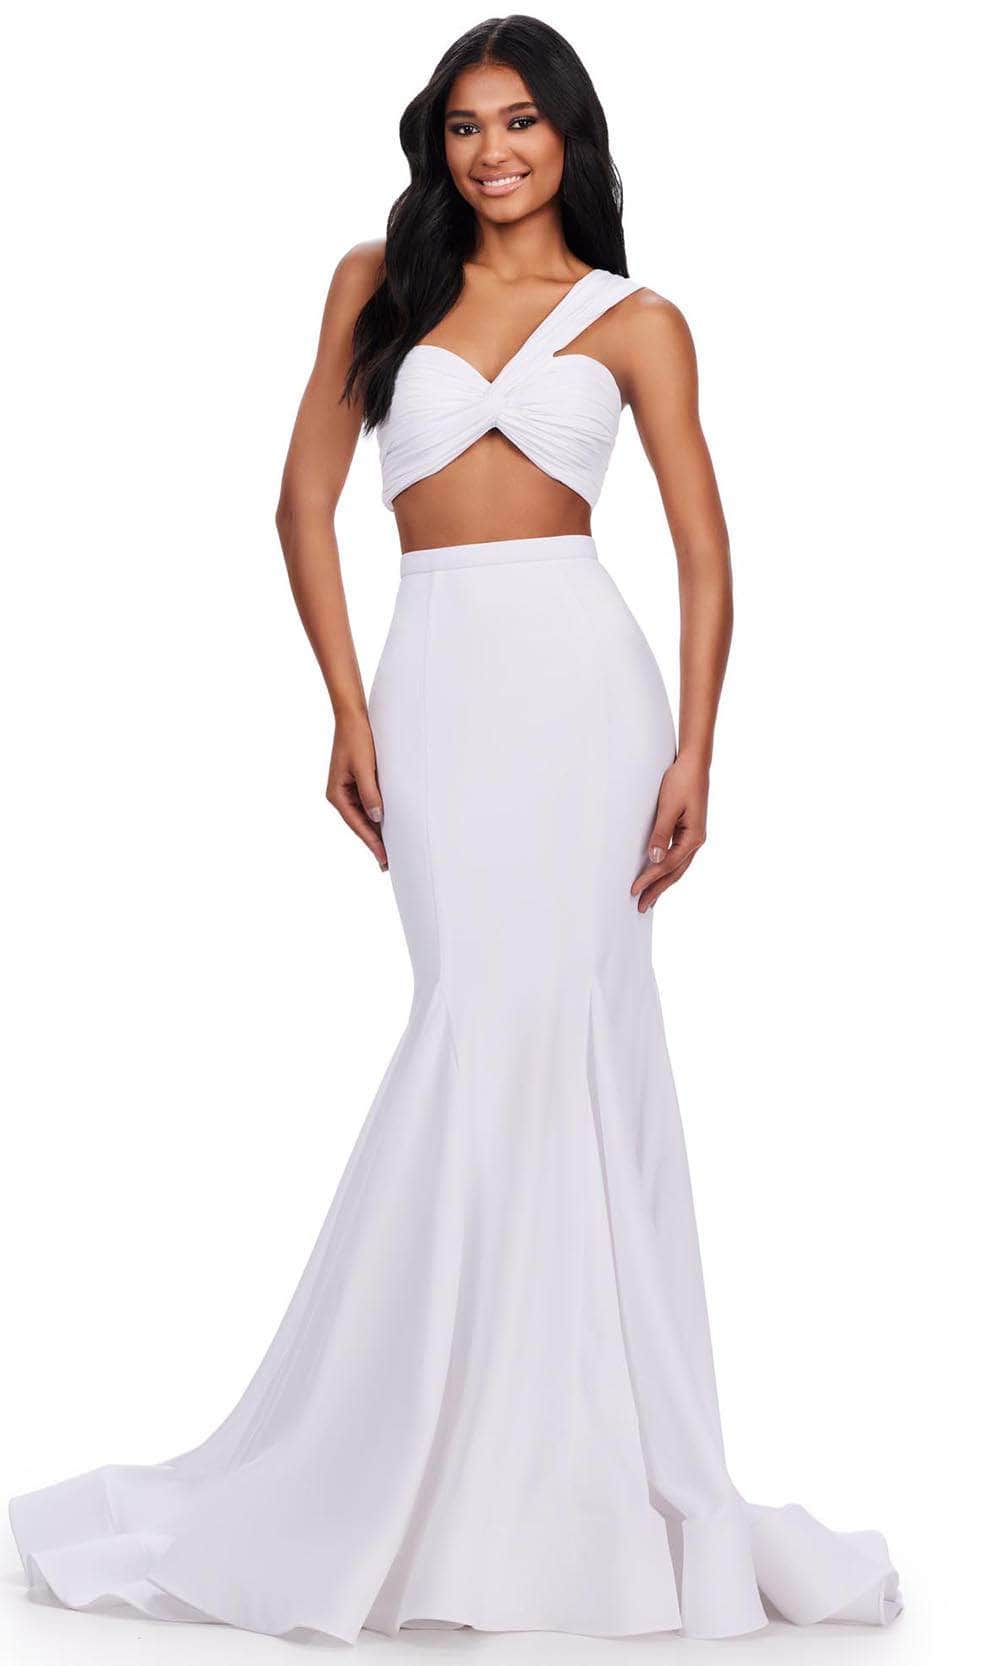 Image of Ashley Lauren 11646 - Asymmetric Two Piece Prom Gown